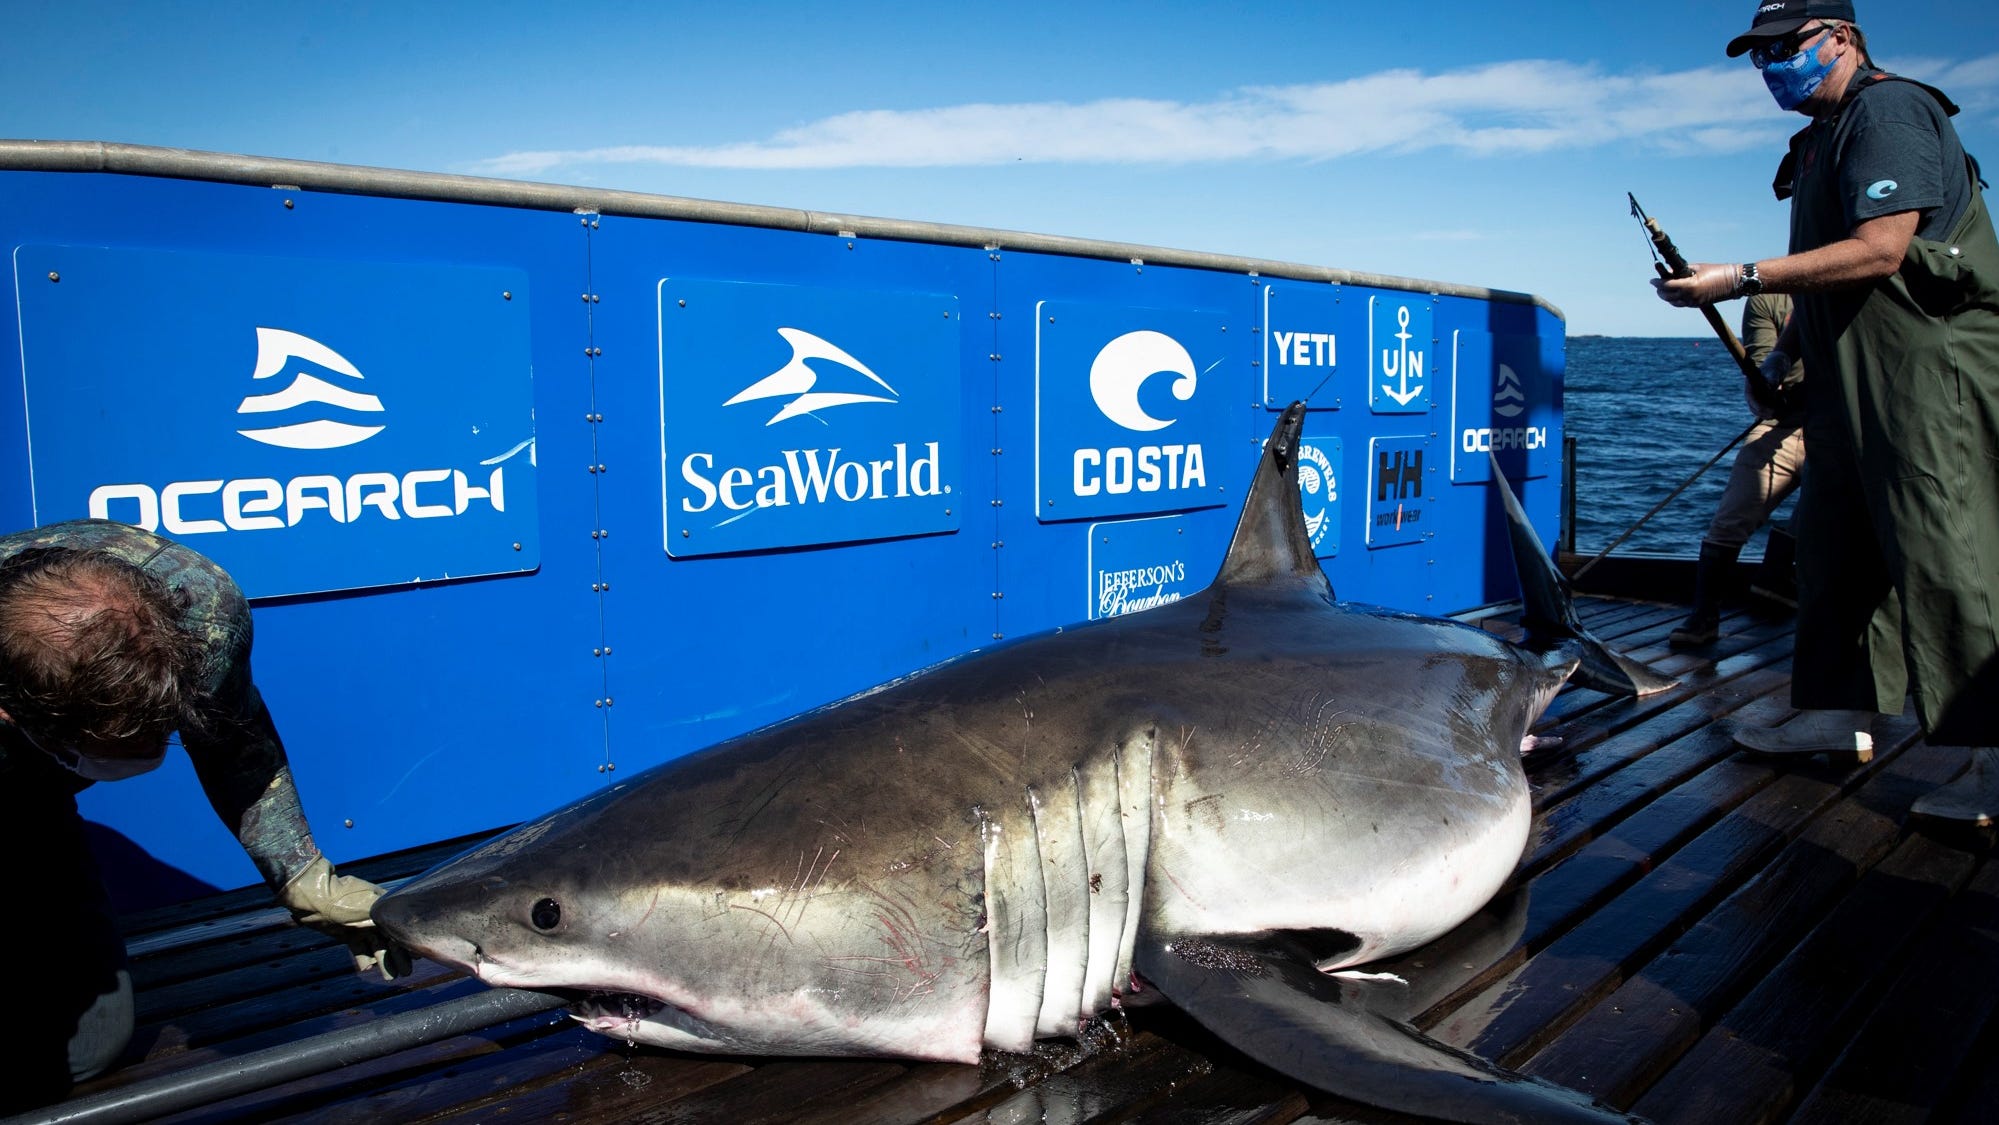 This 1,500 pound great white shark is making his annual return to North Carolina